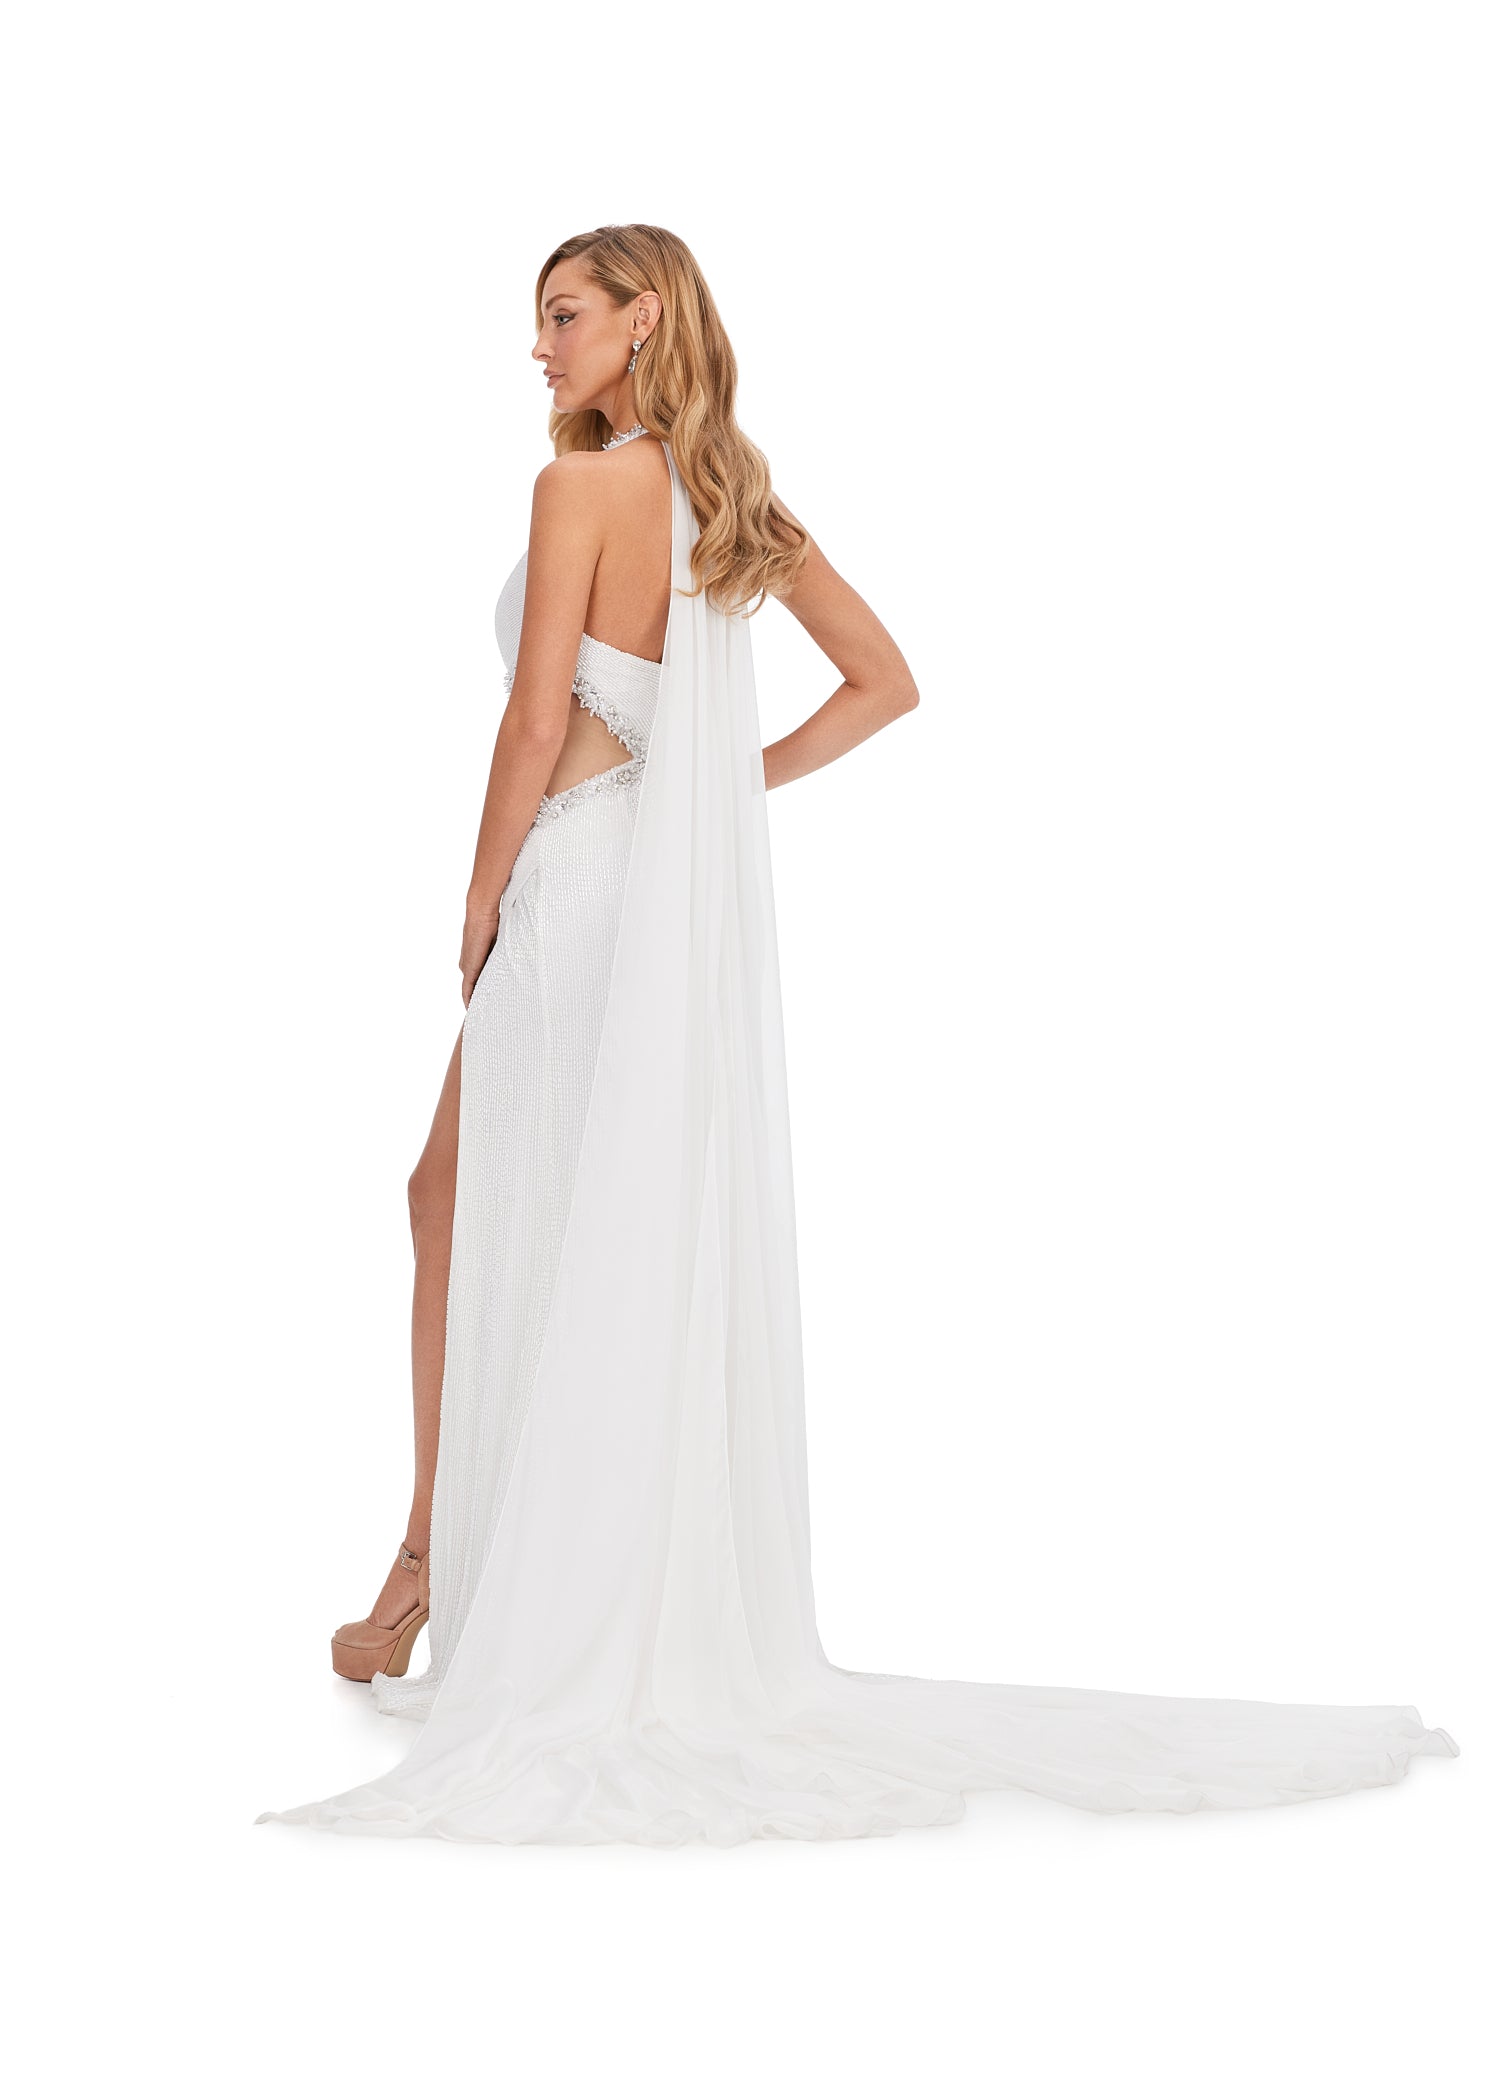 Ashley Lauren 11399 Halter Neckline Liquid Beaded Chiffon Cape Illusion Cut Outs With Crystal Detail Formal Dress . Sparkle from every angle in this elegantly detailed gown. The liquid beading is met with crystal accents that follow the dresses cut outs. With a gorgeous flowing cape, this dress is going to make you feel and look glamorous!